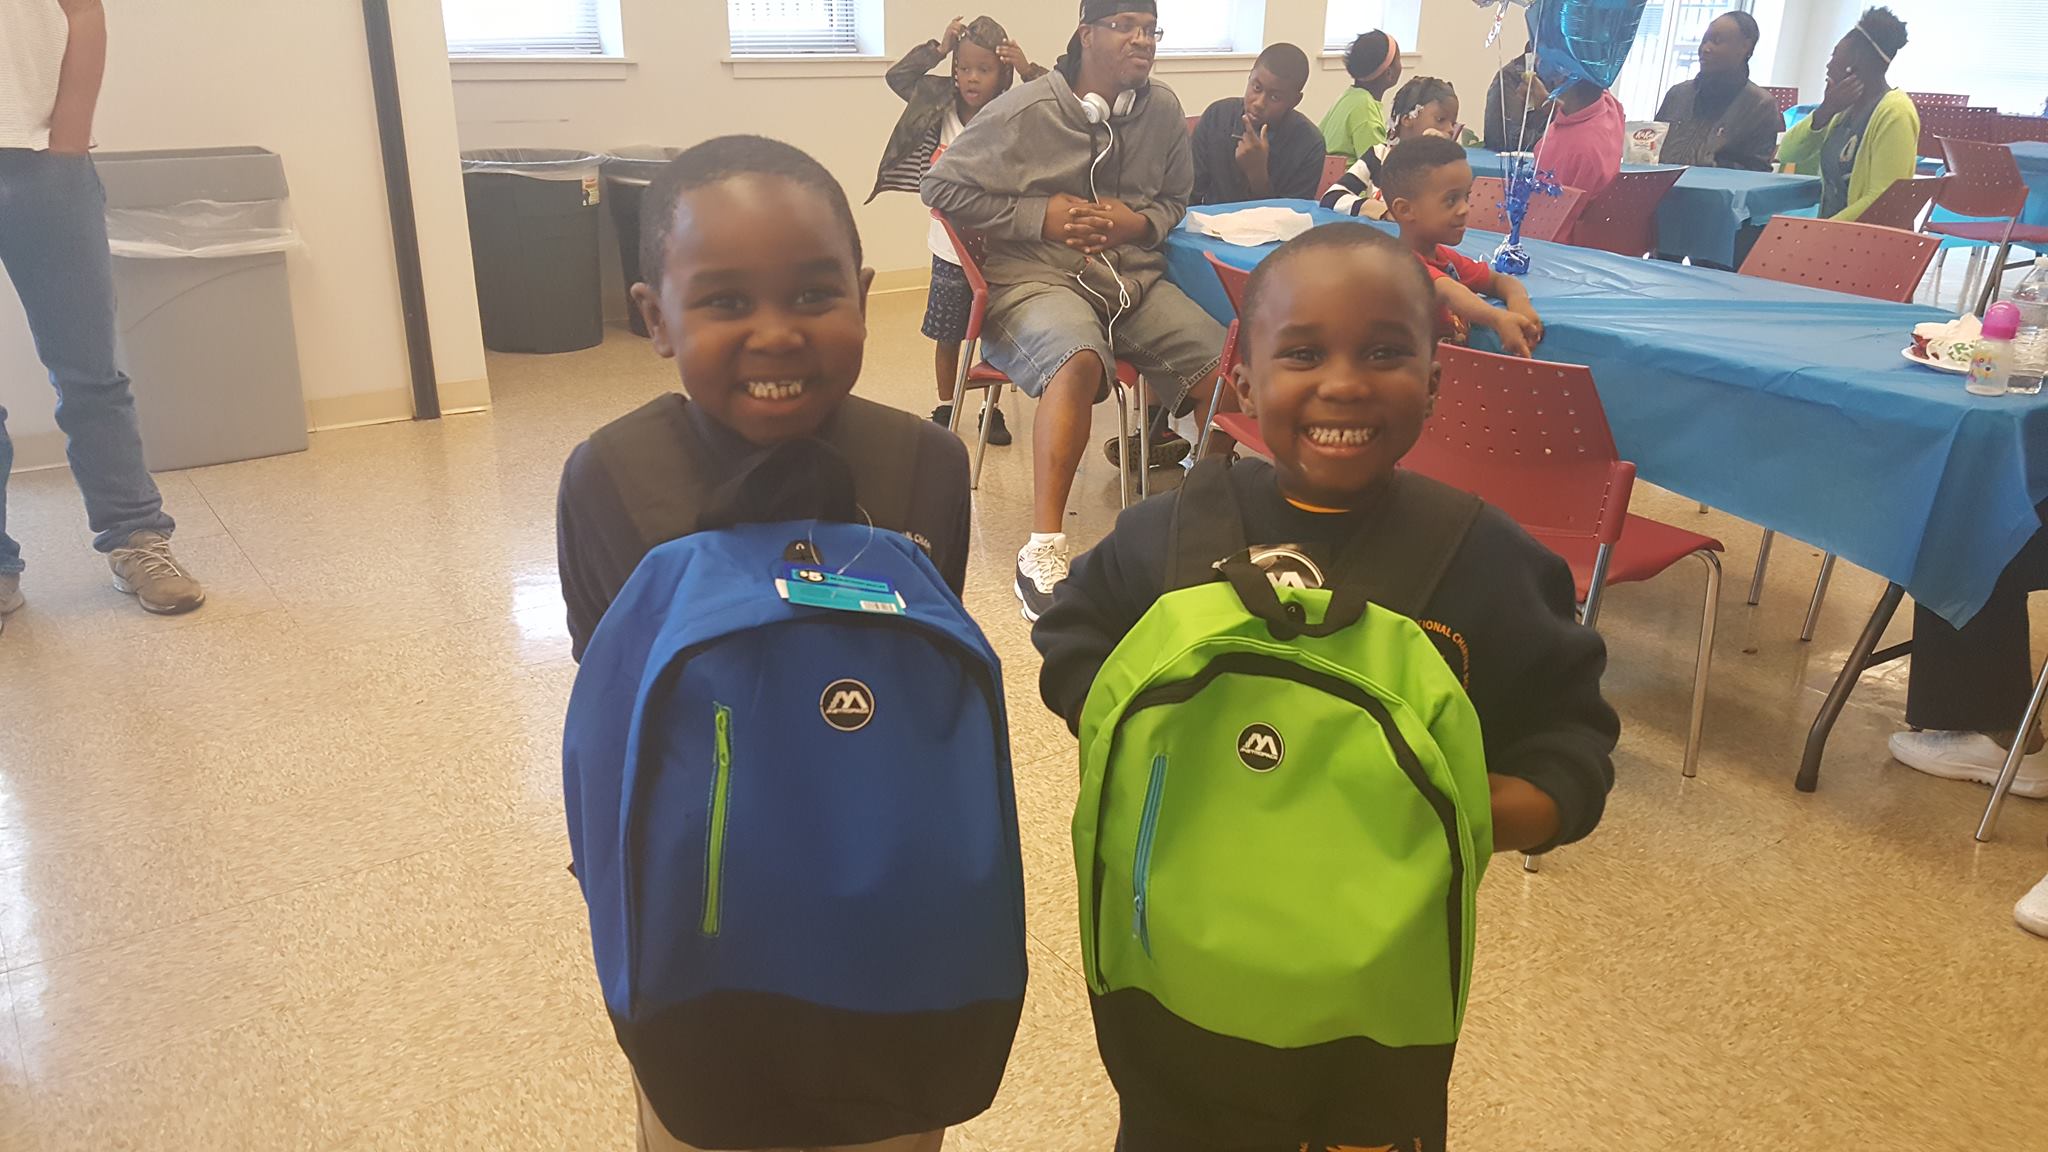 These kids at Wentworth Commons are so happy with their new school gear!